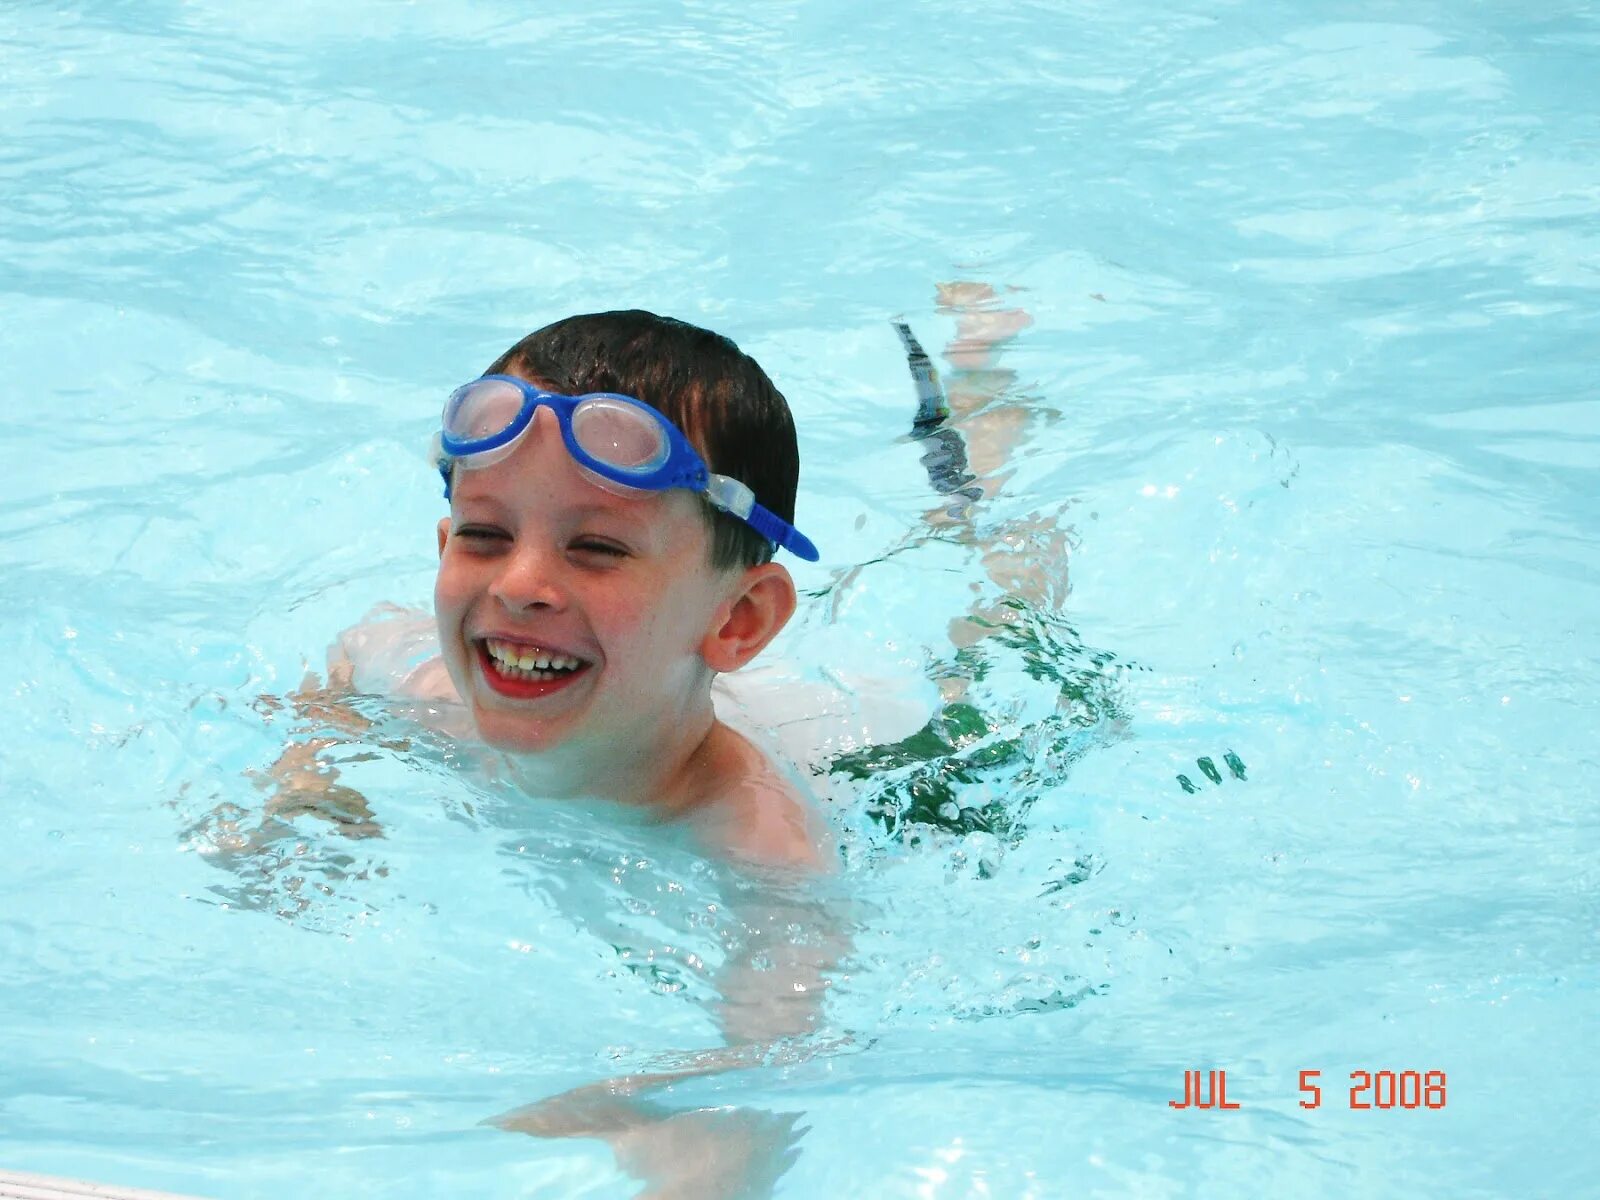 He can Swim. He Swims. I can't Swim picture for Kids. Dad can Swim.